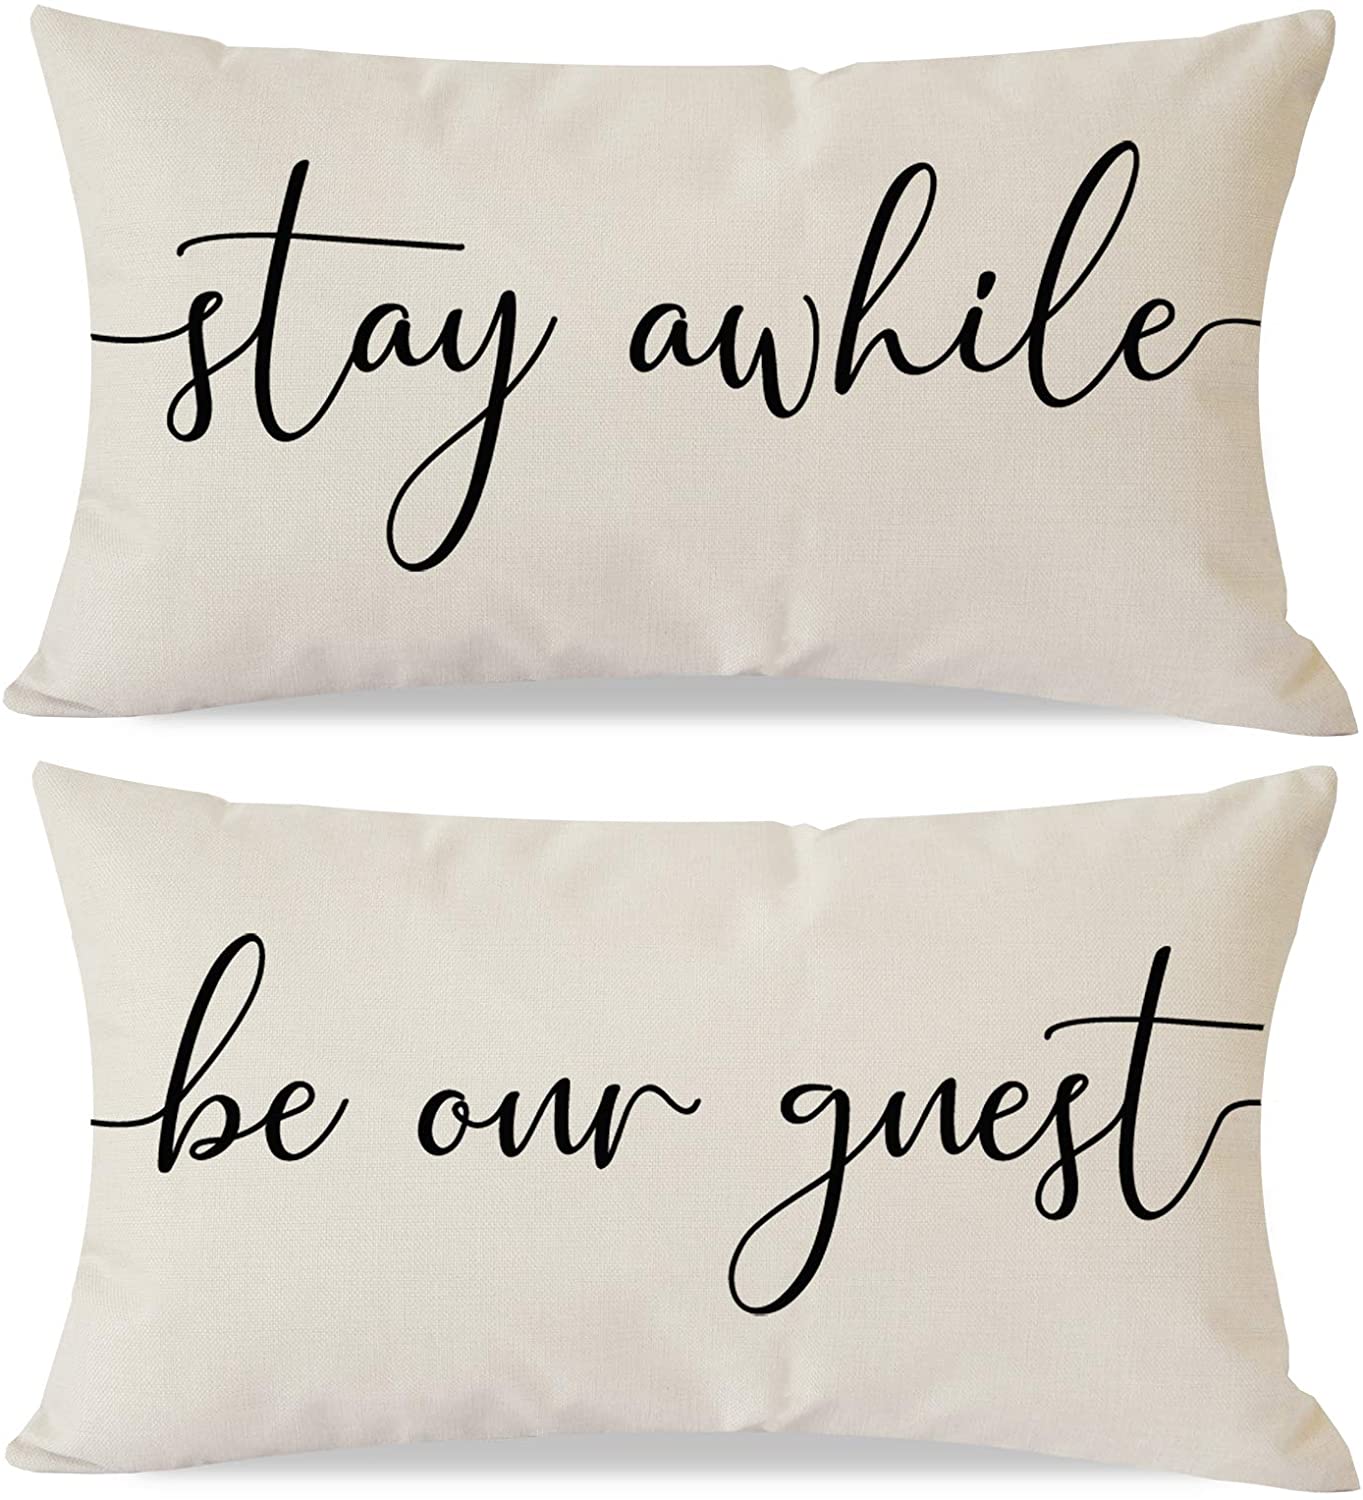 PANDICORN Farmhouse Pillow Covers 18x18 with Words Welcome to Our Porc